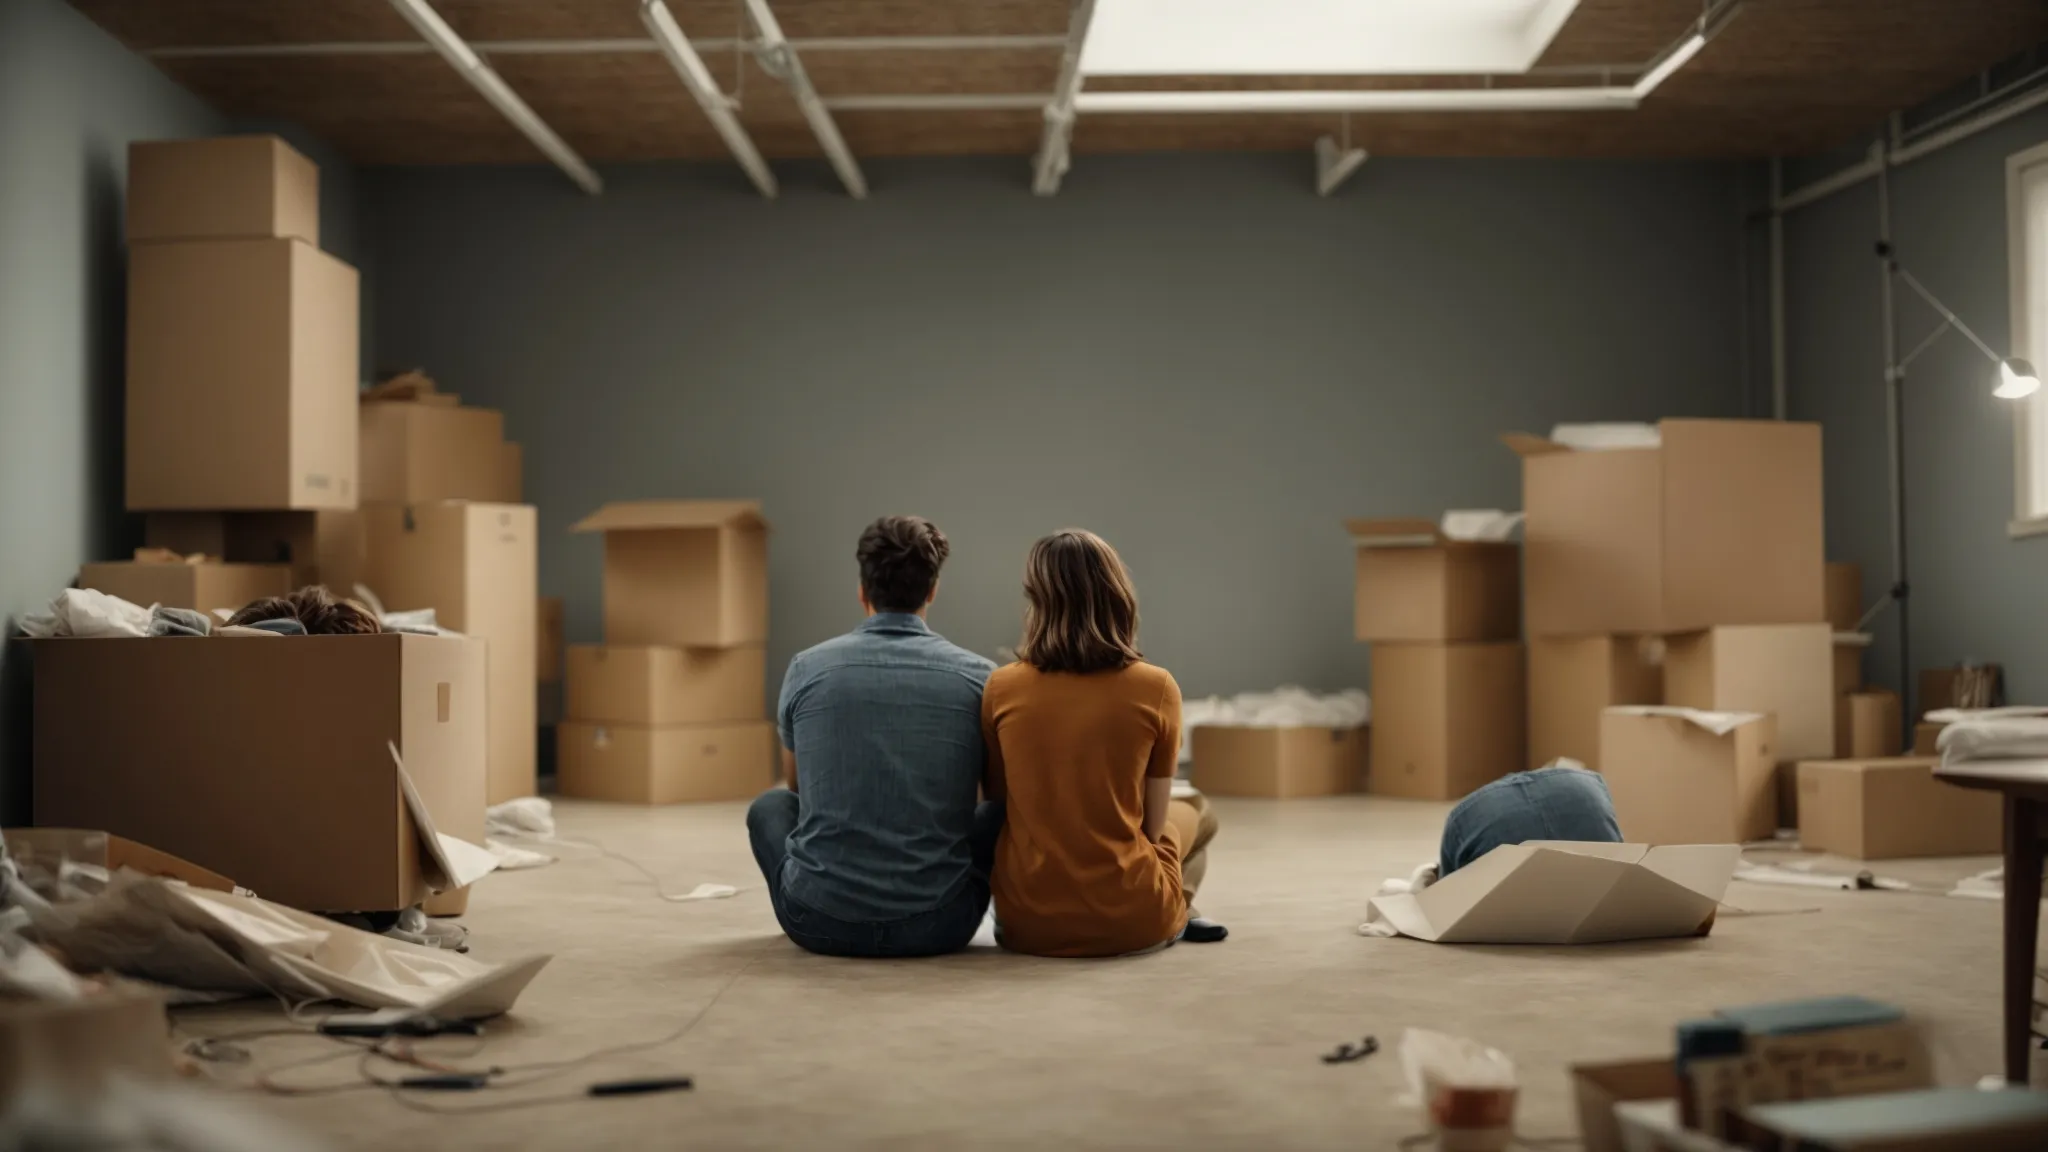 Create an image depicting a couple sitting on opposite ends of a spacious, well-lit room, surrounded by moving boxes and furniture in disarray. Their tense expressions and body language convey the emotional strain of divorce proceedings.